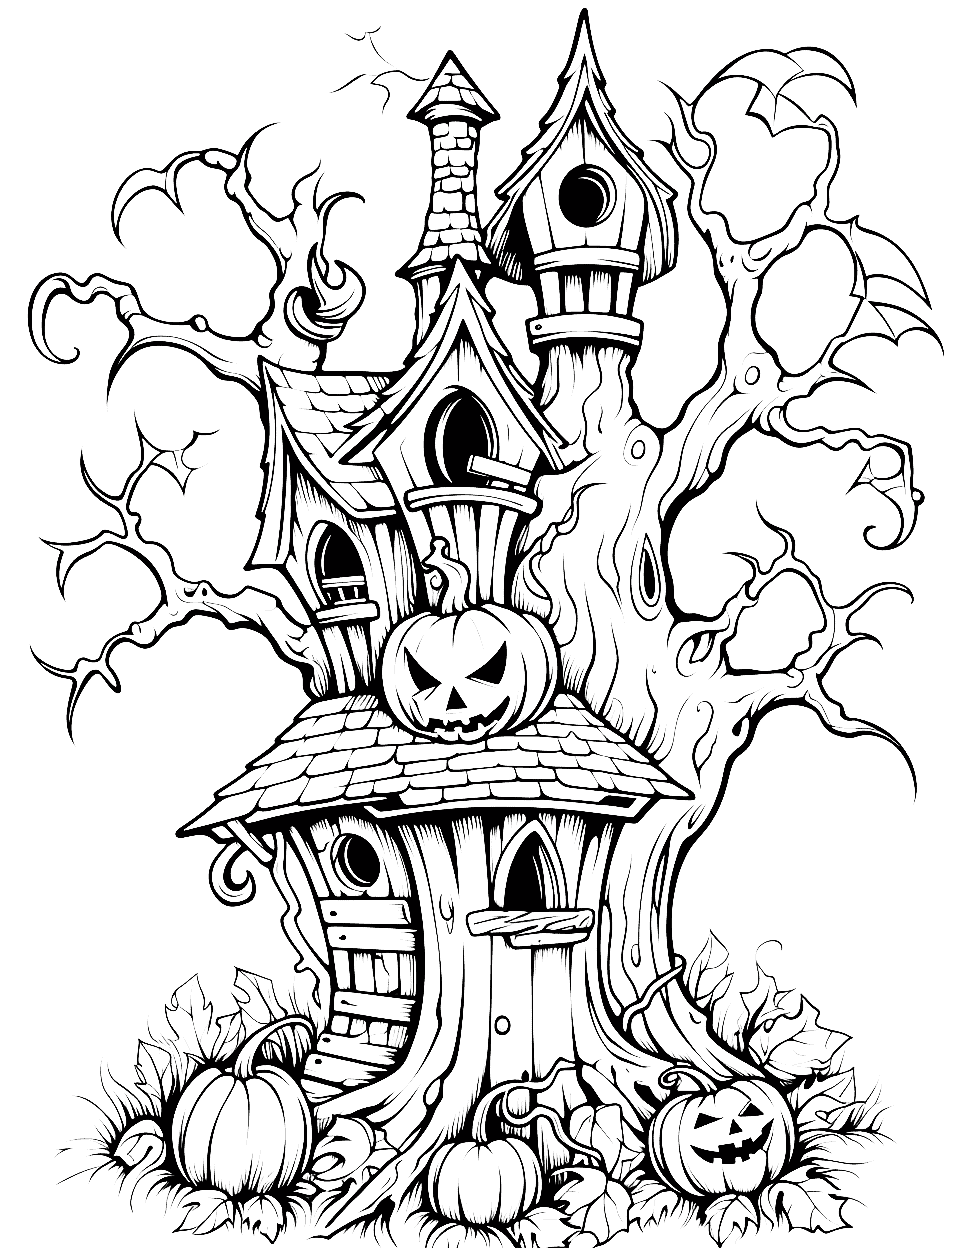 Haunted Tree House Halloween Coloring Page - A detailed picture of a haunted tree house filled with fun and spooky details.